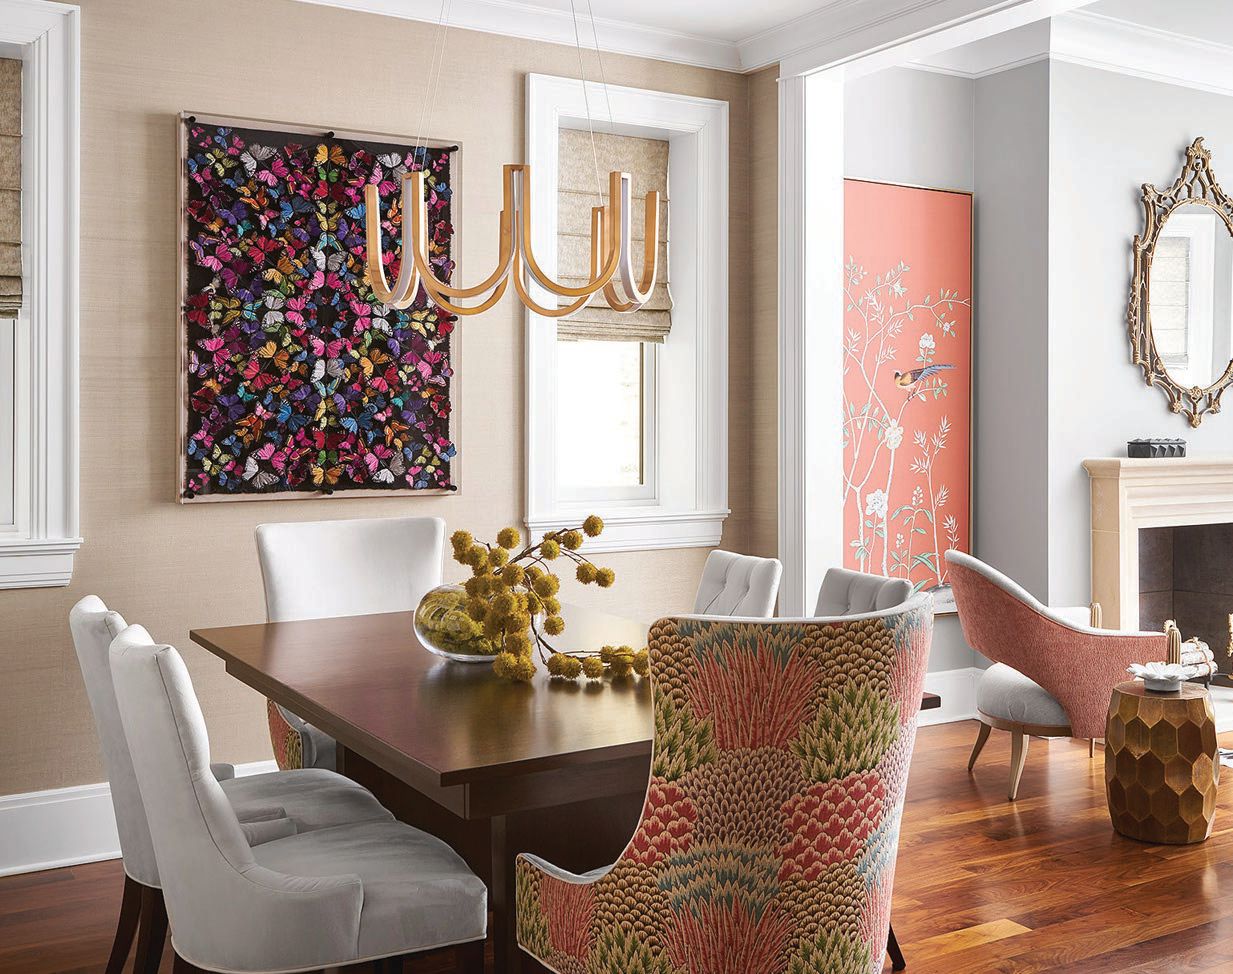 Colorful art by Trudy Lynn Elliott (@ trudylynnelliott) and a table by Eurocraft stand out in the dining room PHOTOGRAPHED BY RYAN MCDONALD